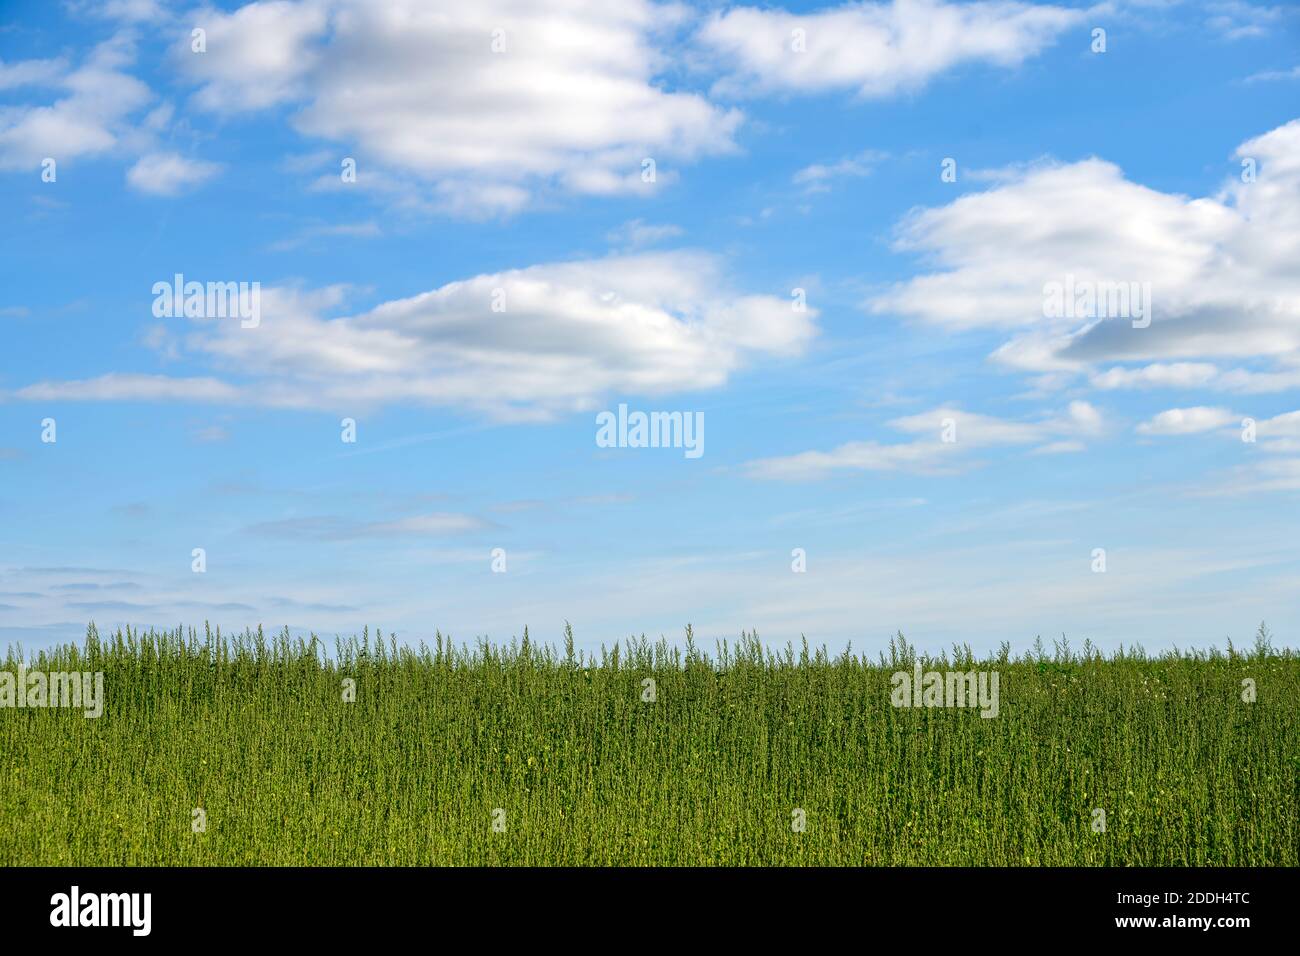 Crop used to produce biogas Stock Photo